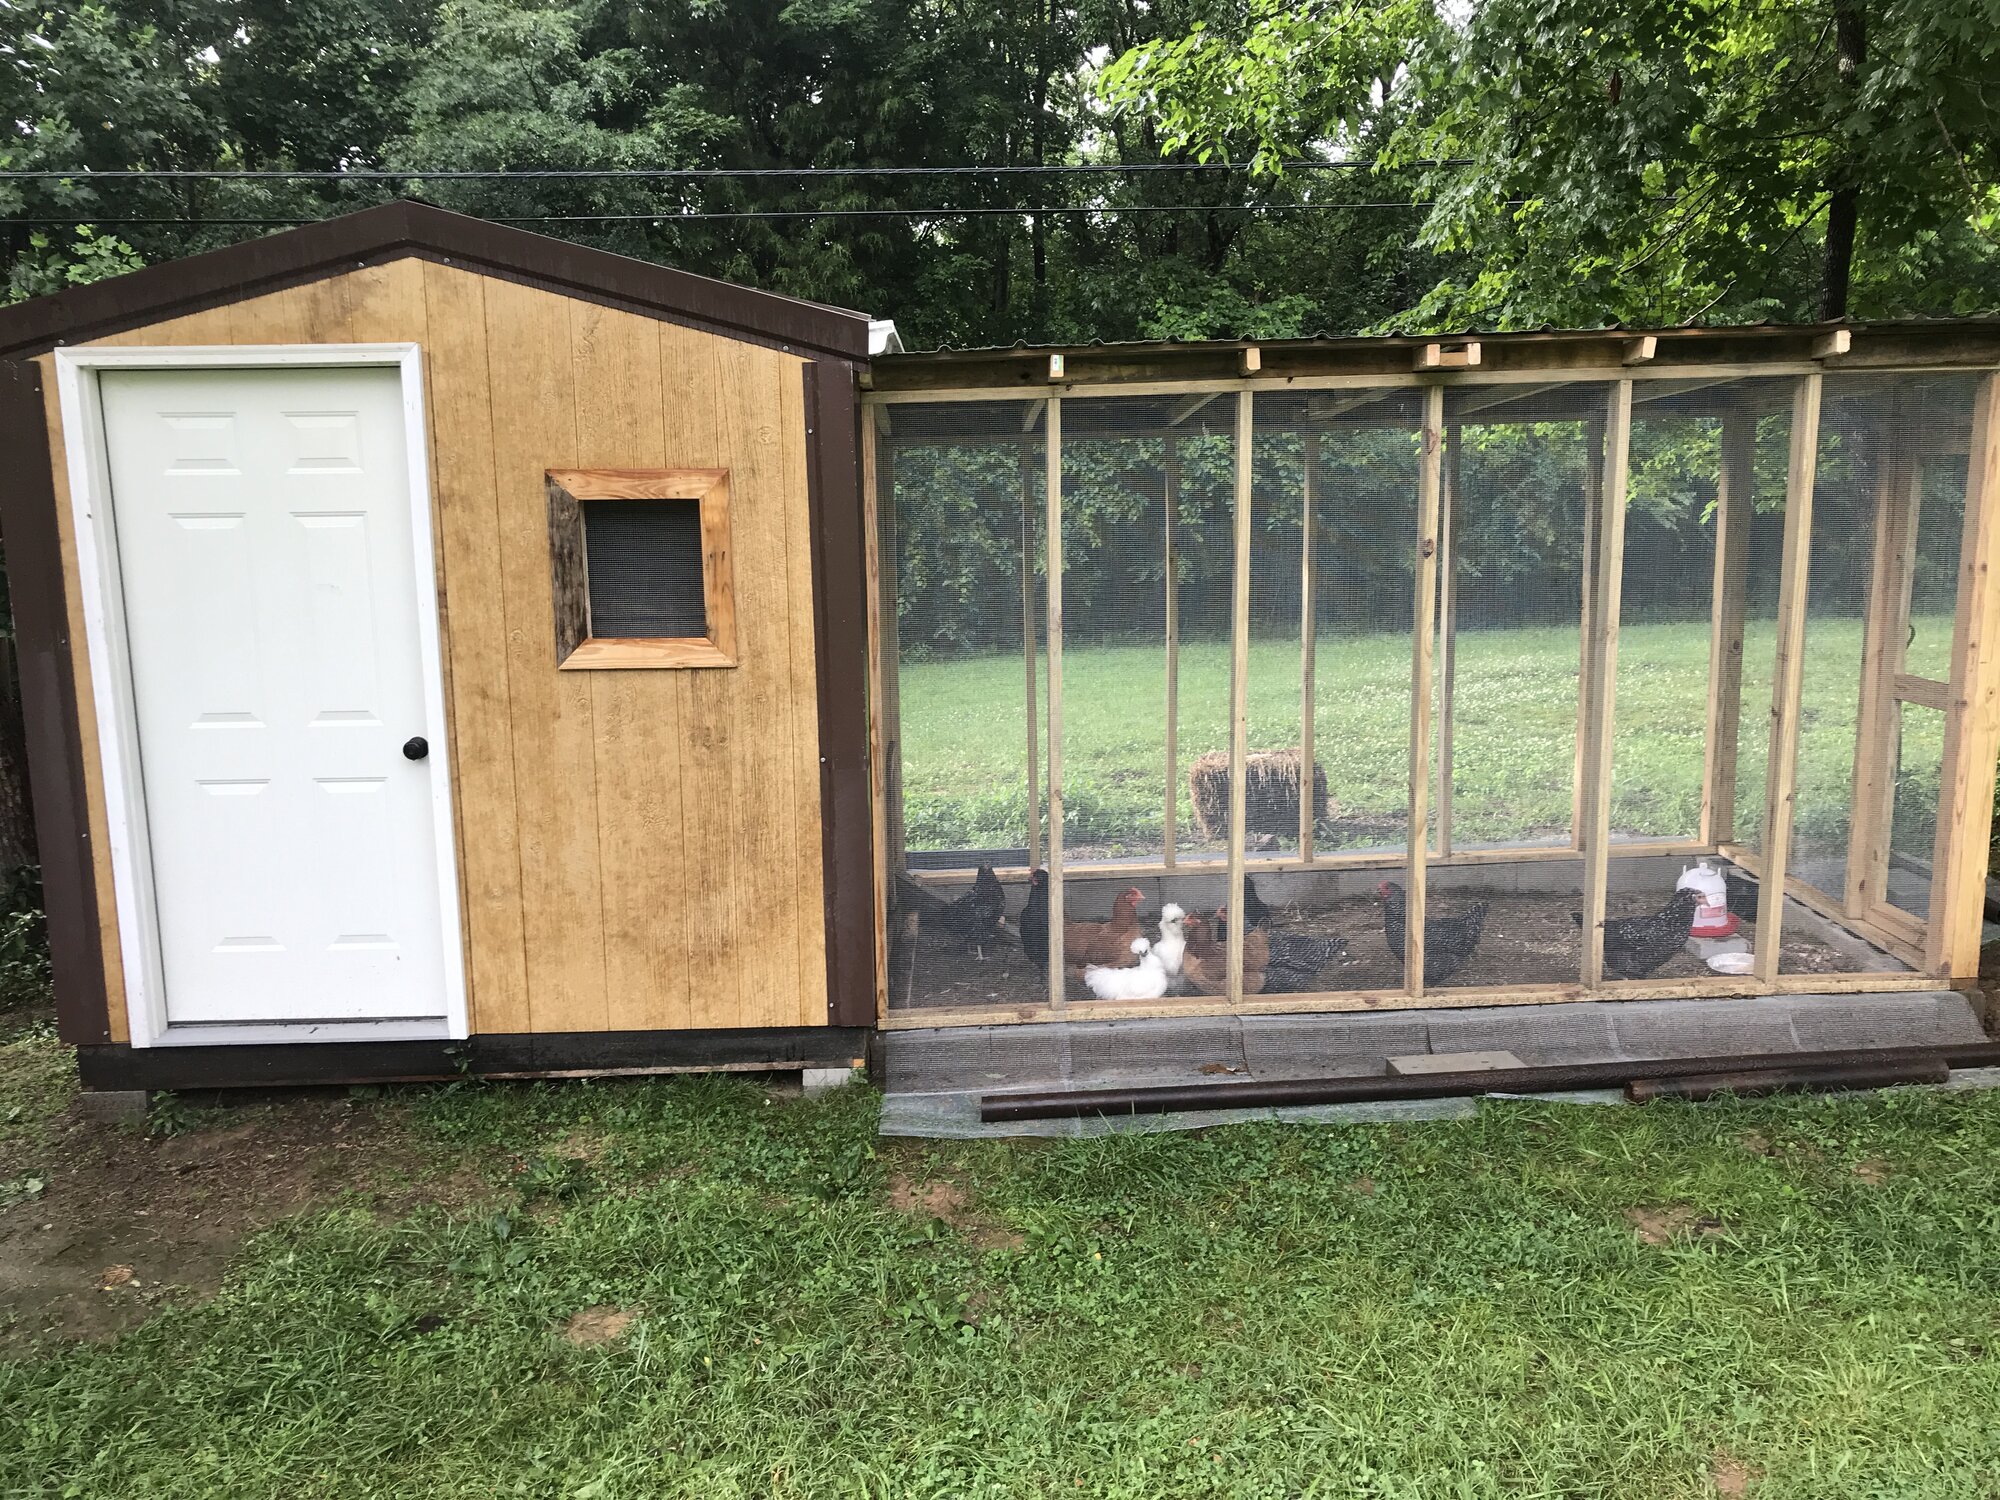 DIY She Shed Chicken Coop and Run - Construction and Plans in Middle TN |  BackYard Chickens - Learn How to Raise Chickens